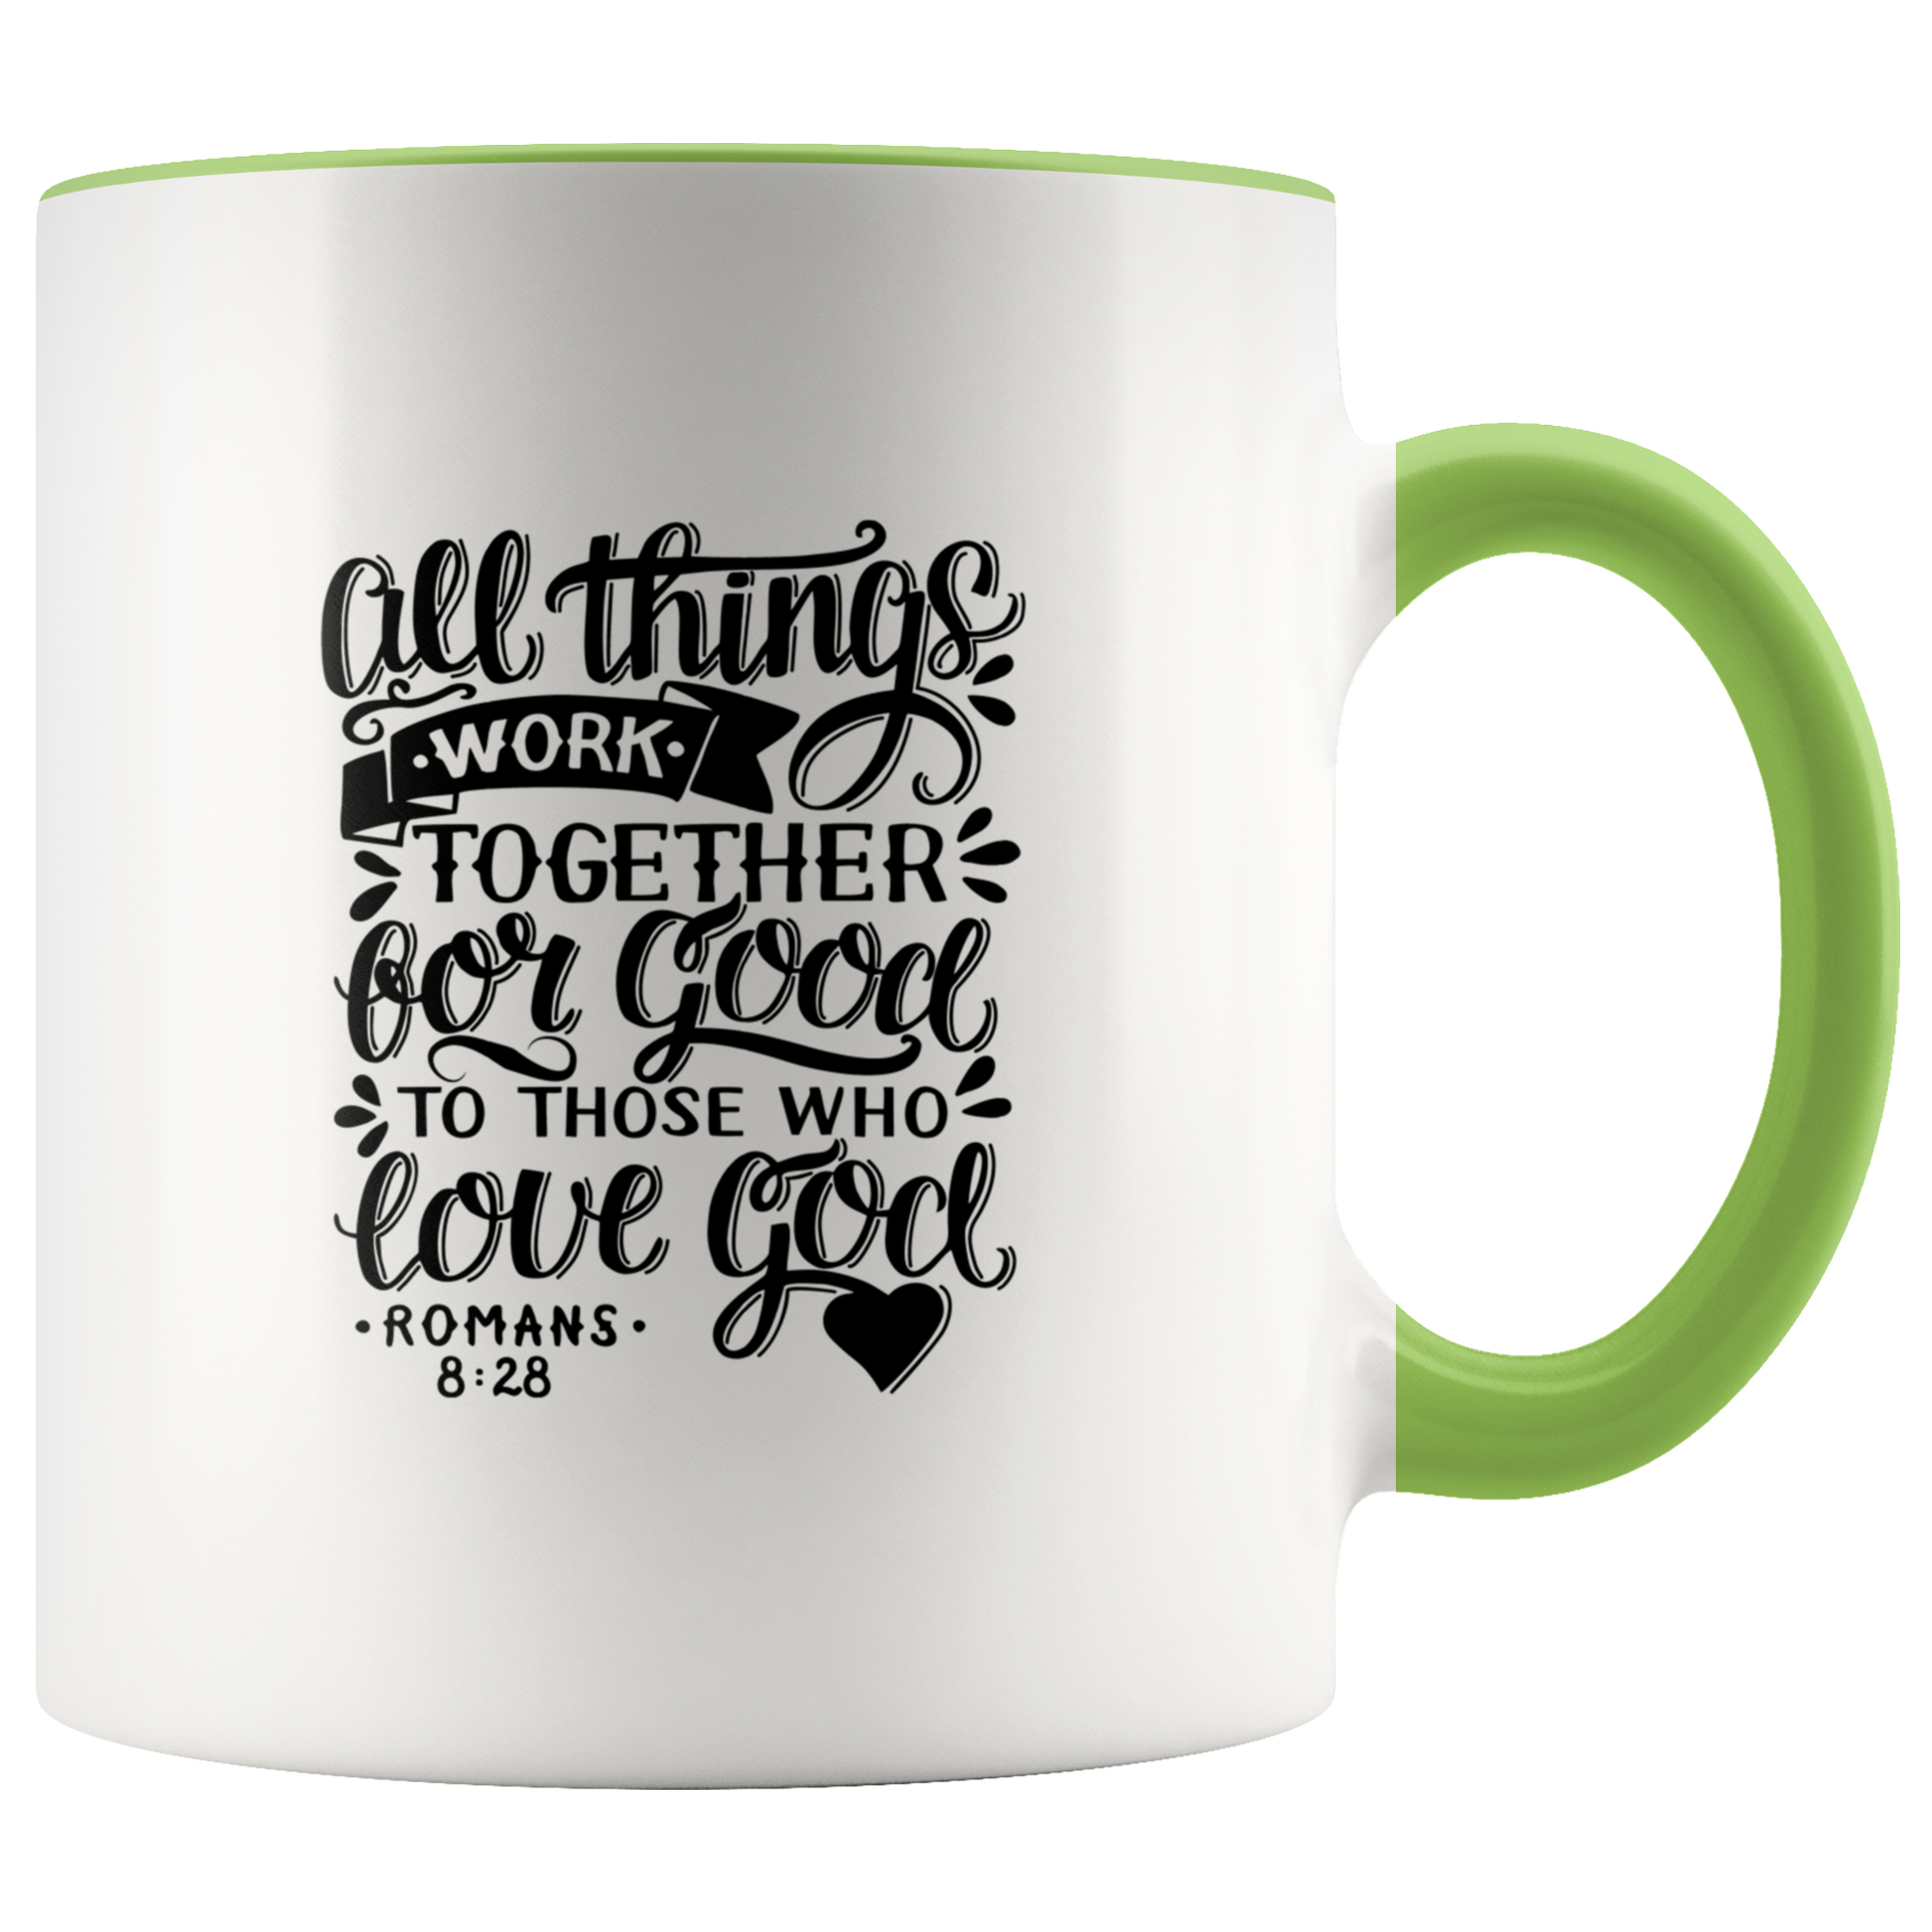 All Things Work Together For Good To Those Who Love God, Romans 8:28 - Accent Mug light green